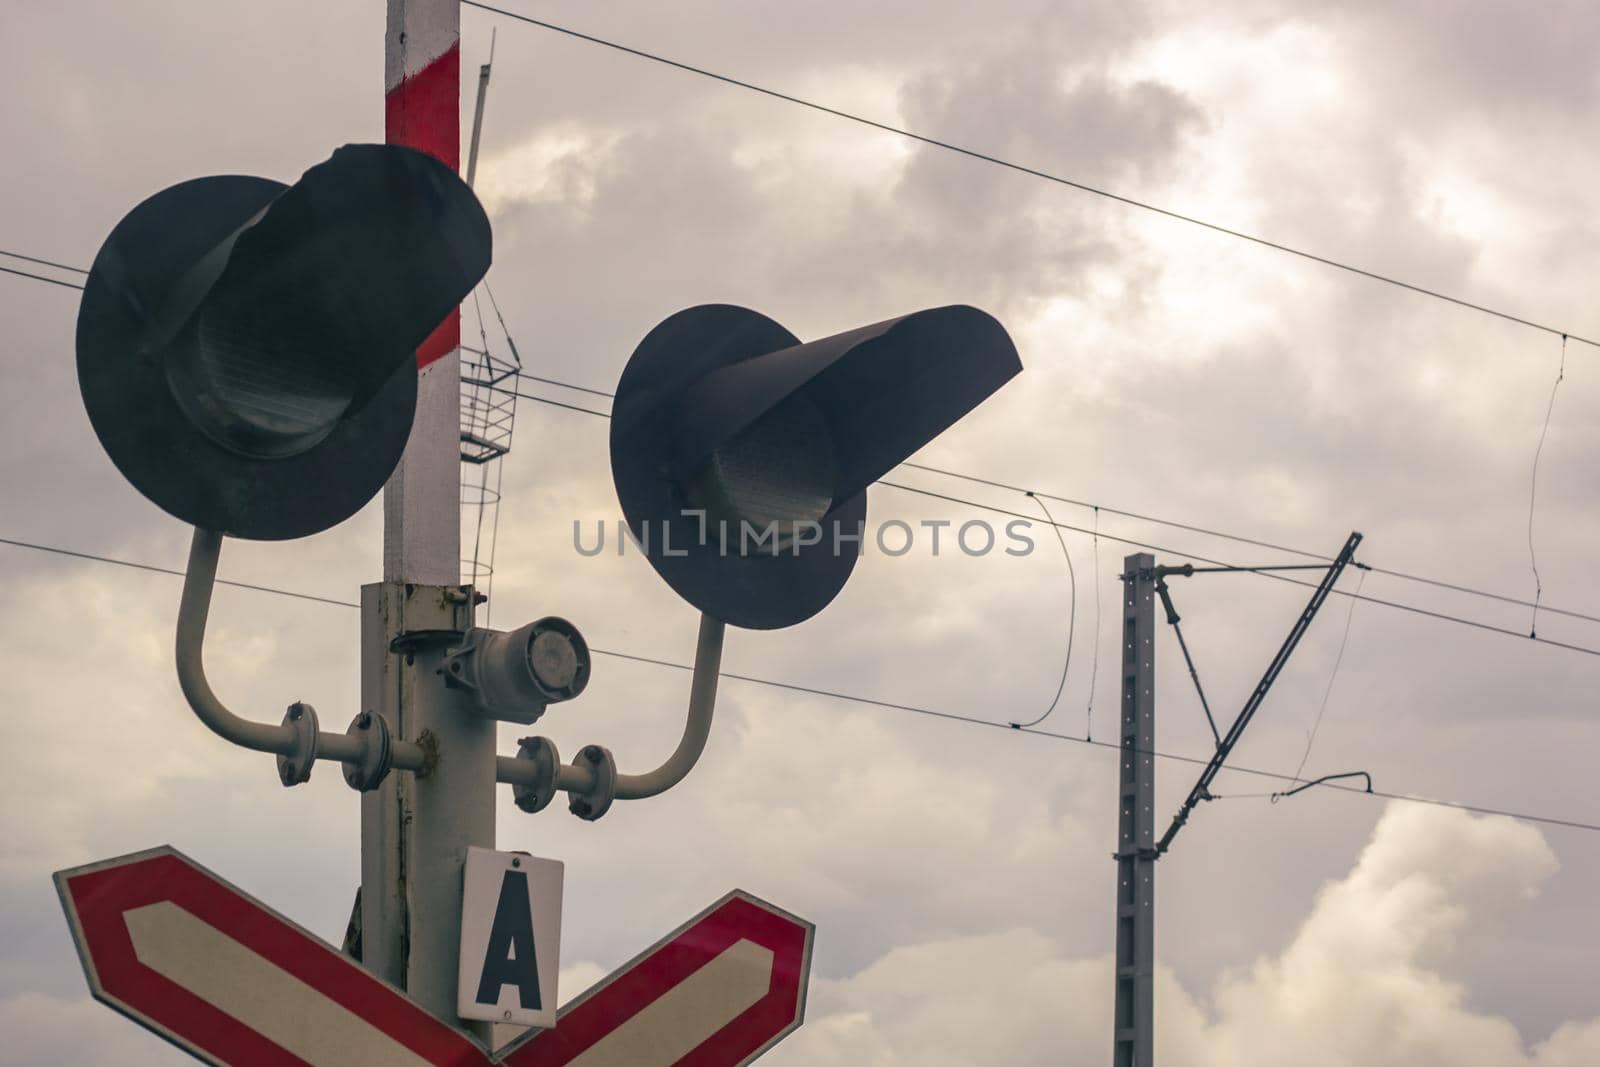 Traffic light at a railway crossing. The object of increased attention is at the intersection of the road and railways.